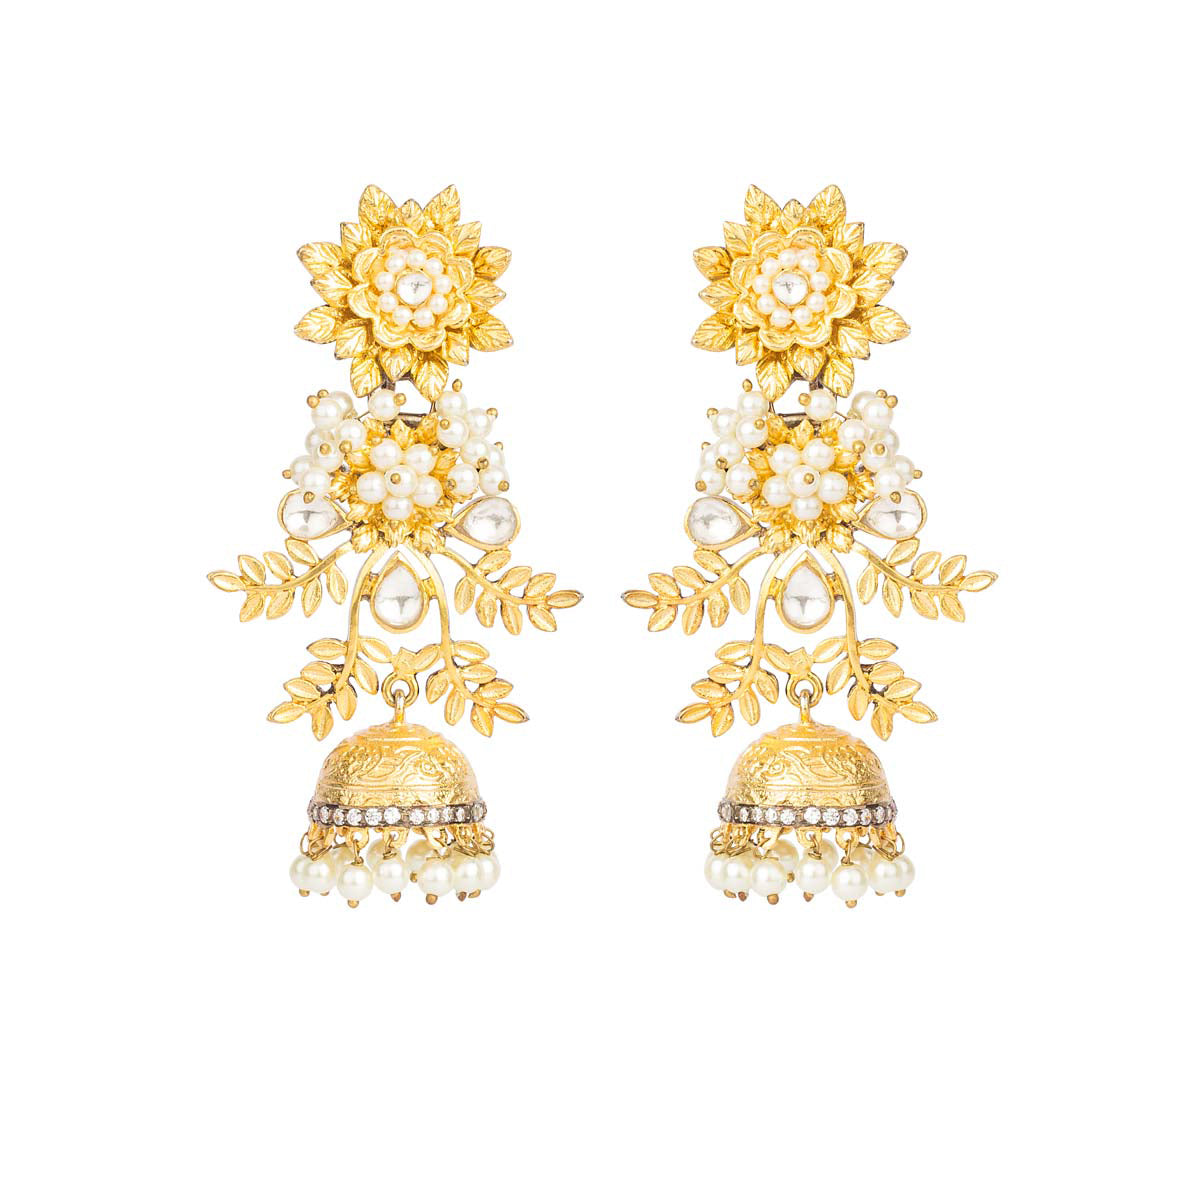 Just as a botanical garden in full bloom - these floral filigree earrings in a matte gold finish have kundan & pearl drops set in a mixed metal alloy.